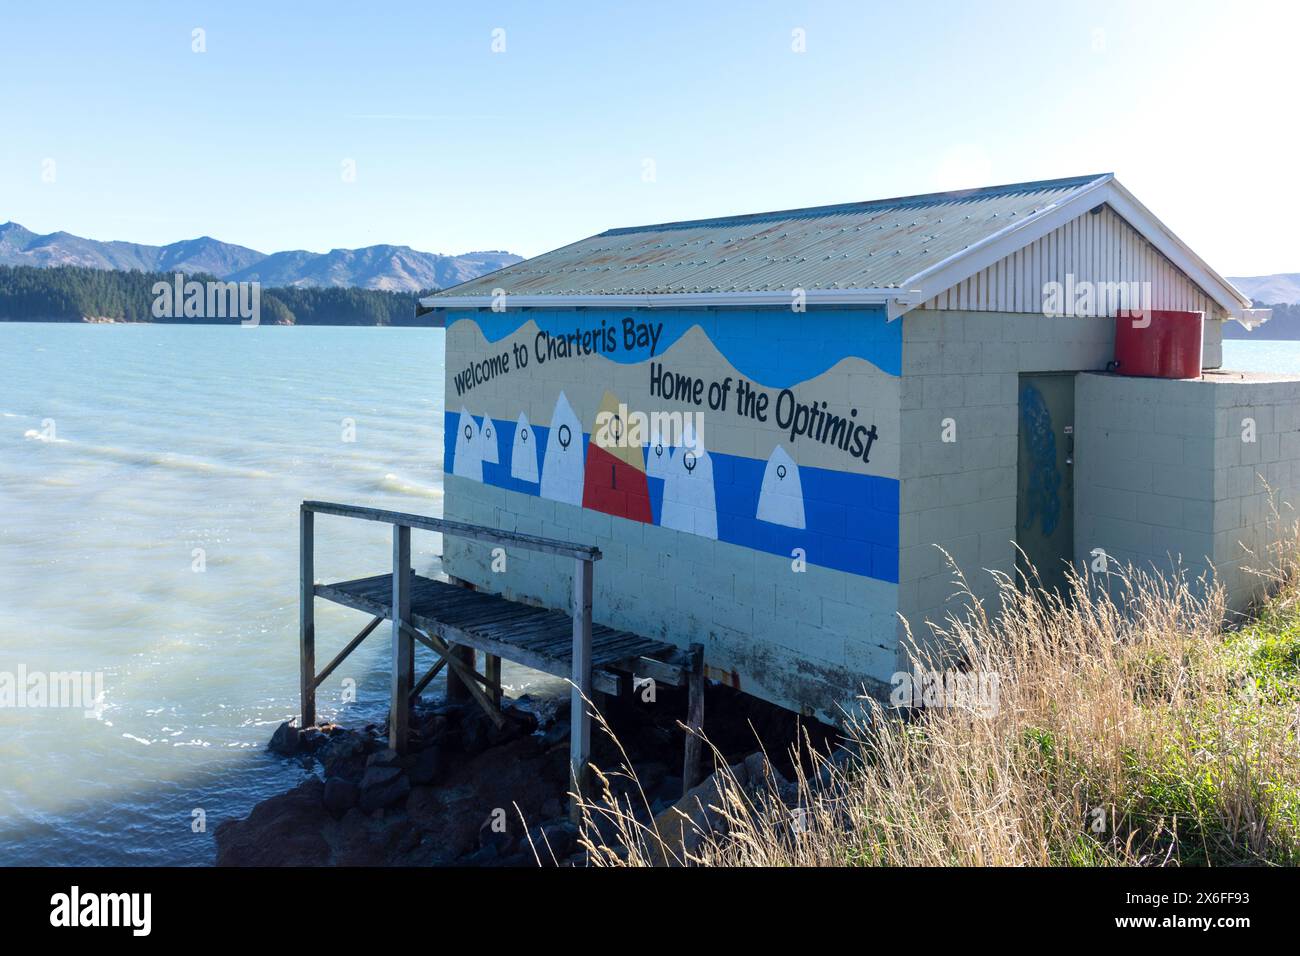 Welcome mural on side of boat shed, Marine Drive, Charteris Bay, Lyttelton Harbour, Banks Peninsula, Canterbury, New Zealand Stock Photo